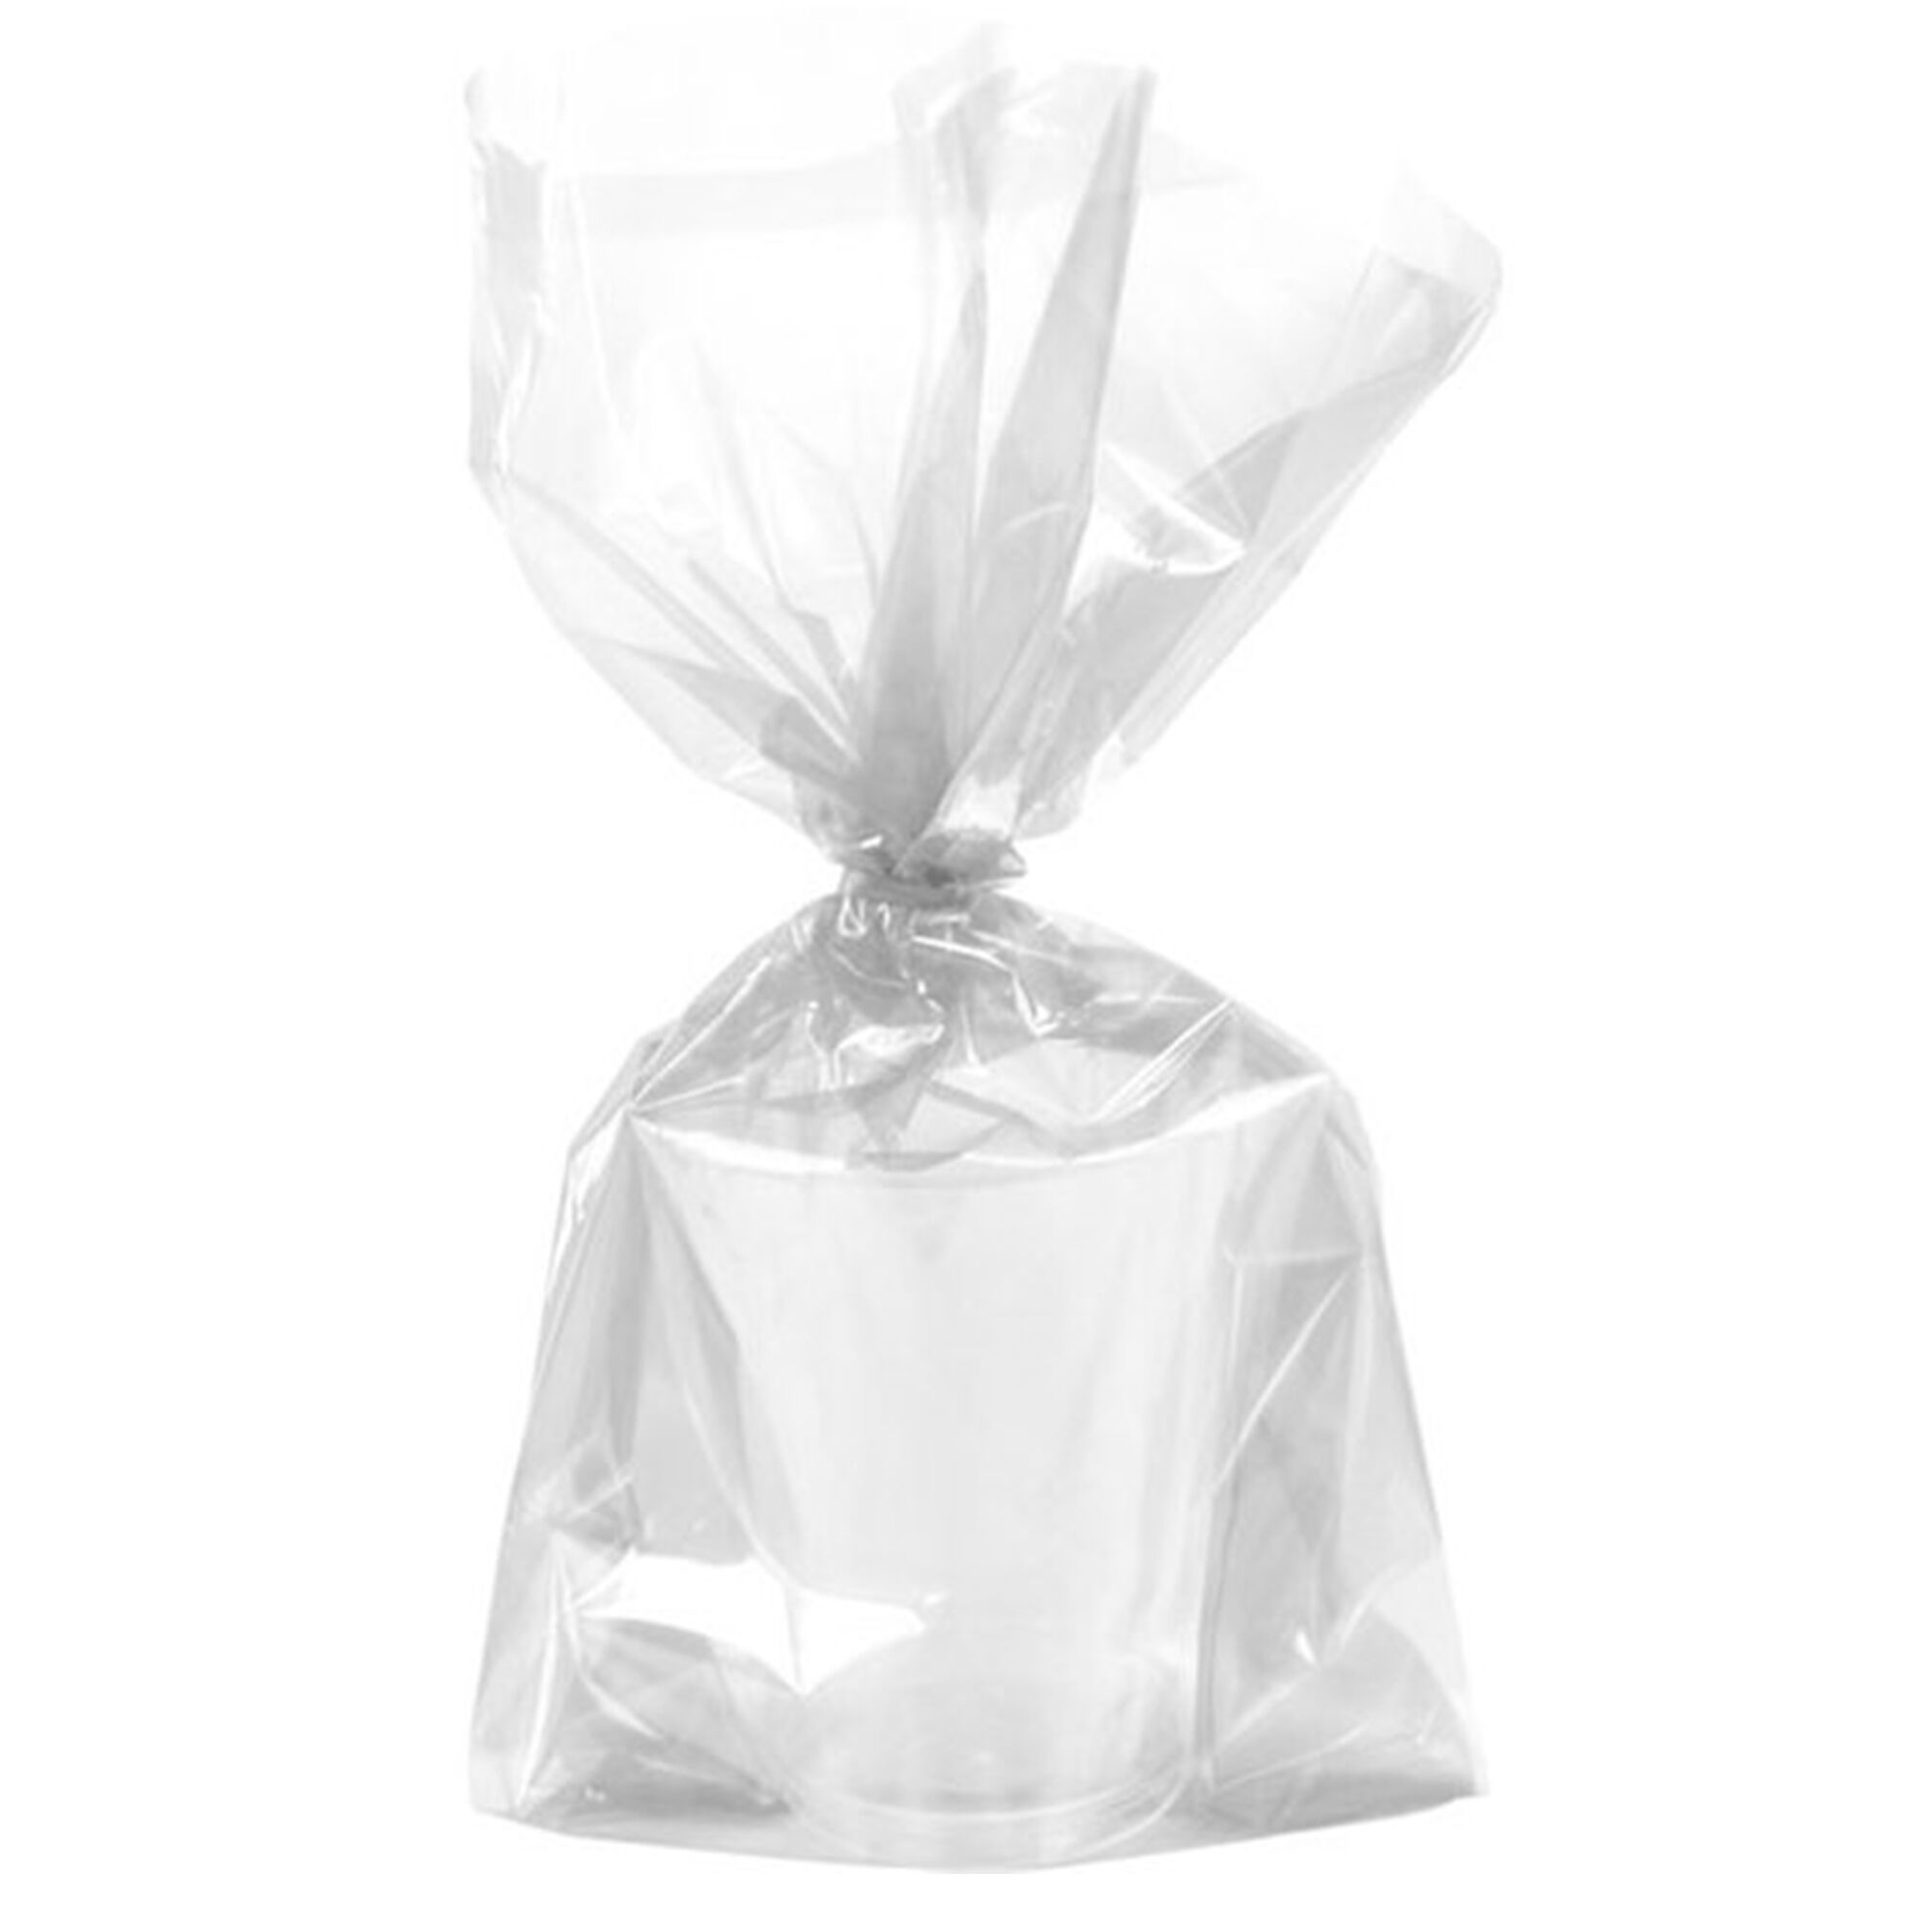 Cello Cellophane Treat Bags6x12 Inches Cellophane Bags 200 Pcs with Twist  Ties Plastic Cello Bags for Packaging DessertBakery  CandiesCookiesChocolateParty Favors  Amazonin Home  Kitchen